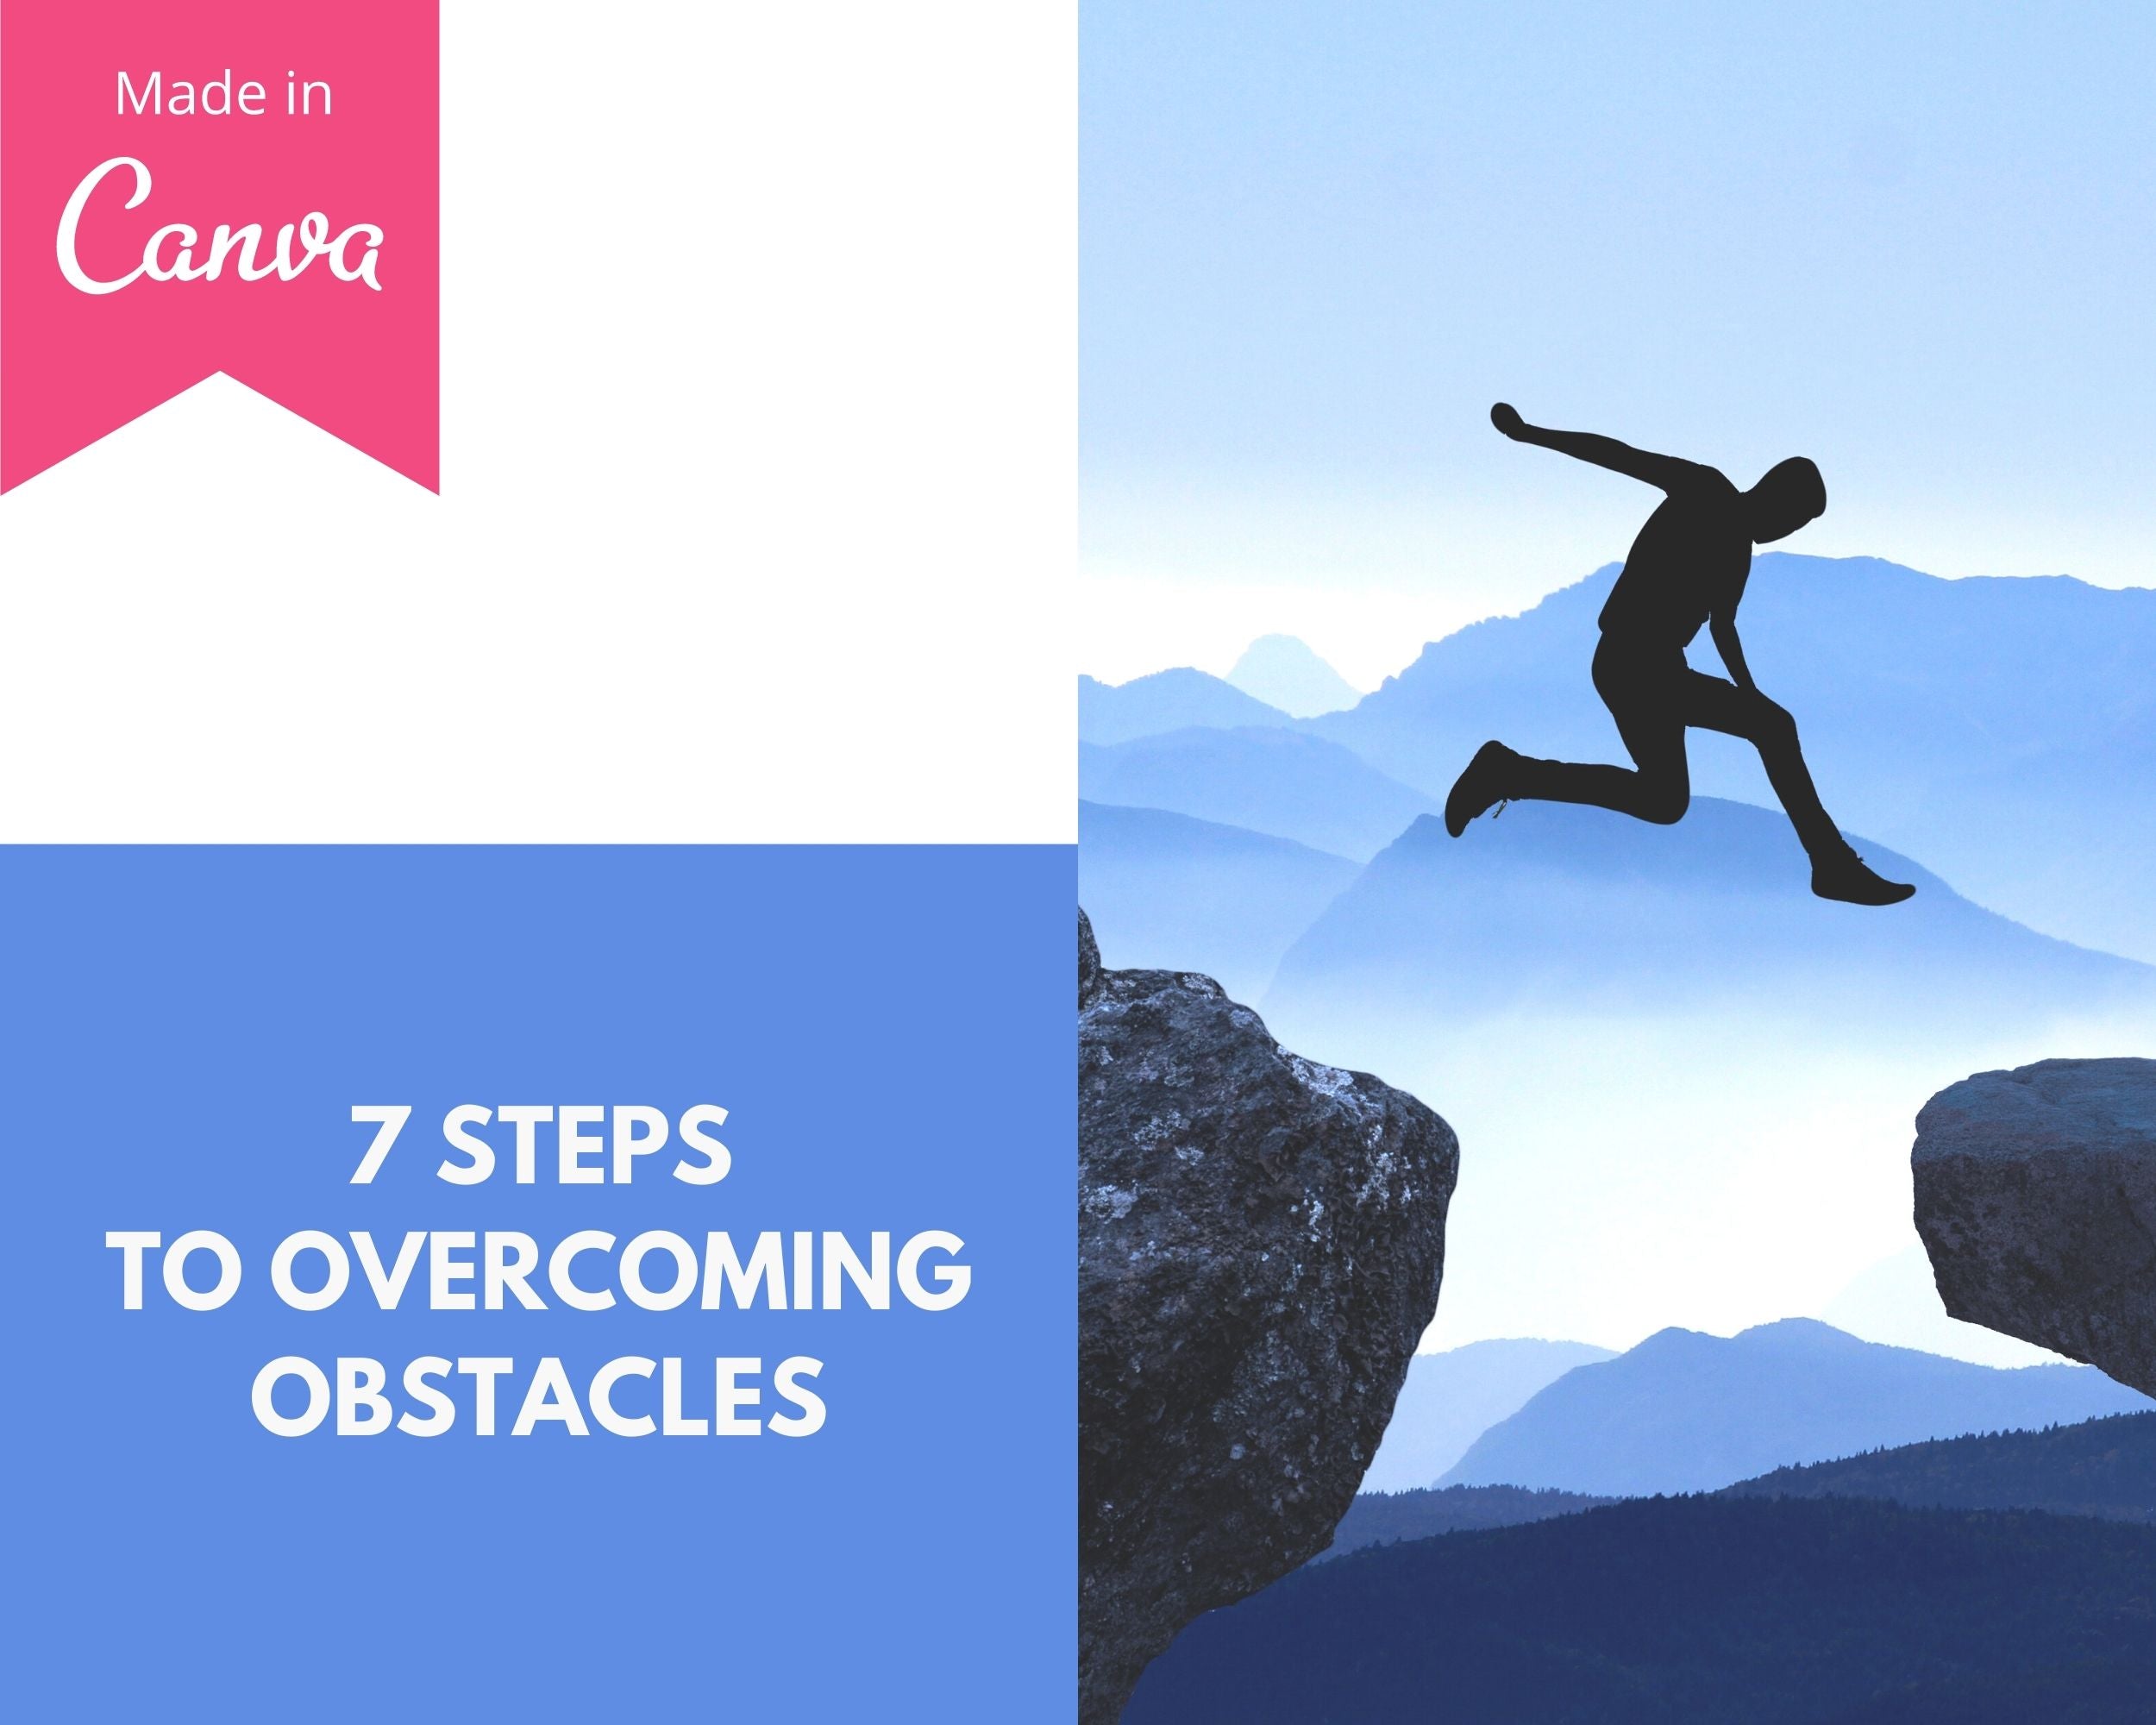 Editable Overcoming Obstacles Email | Rebrandable Done-for-You eCourse